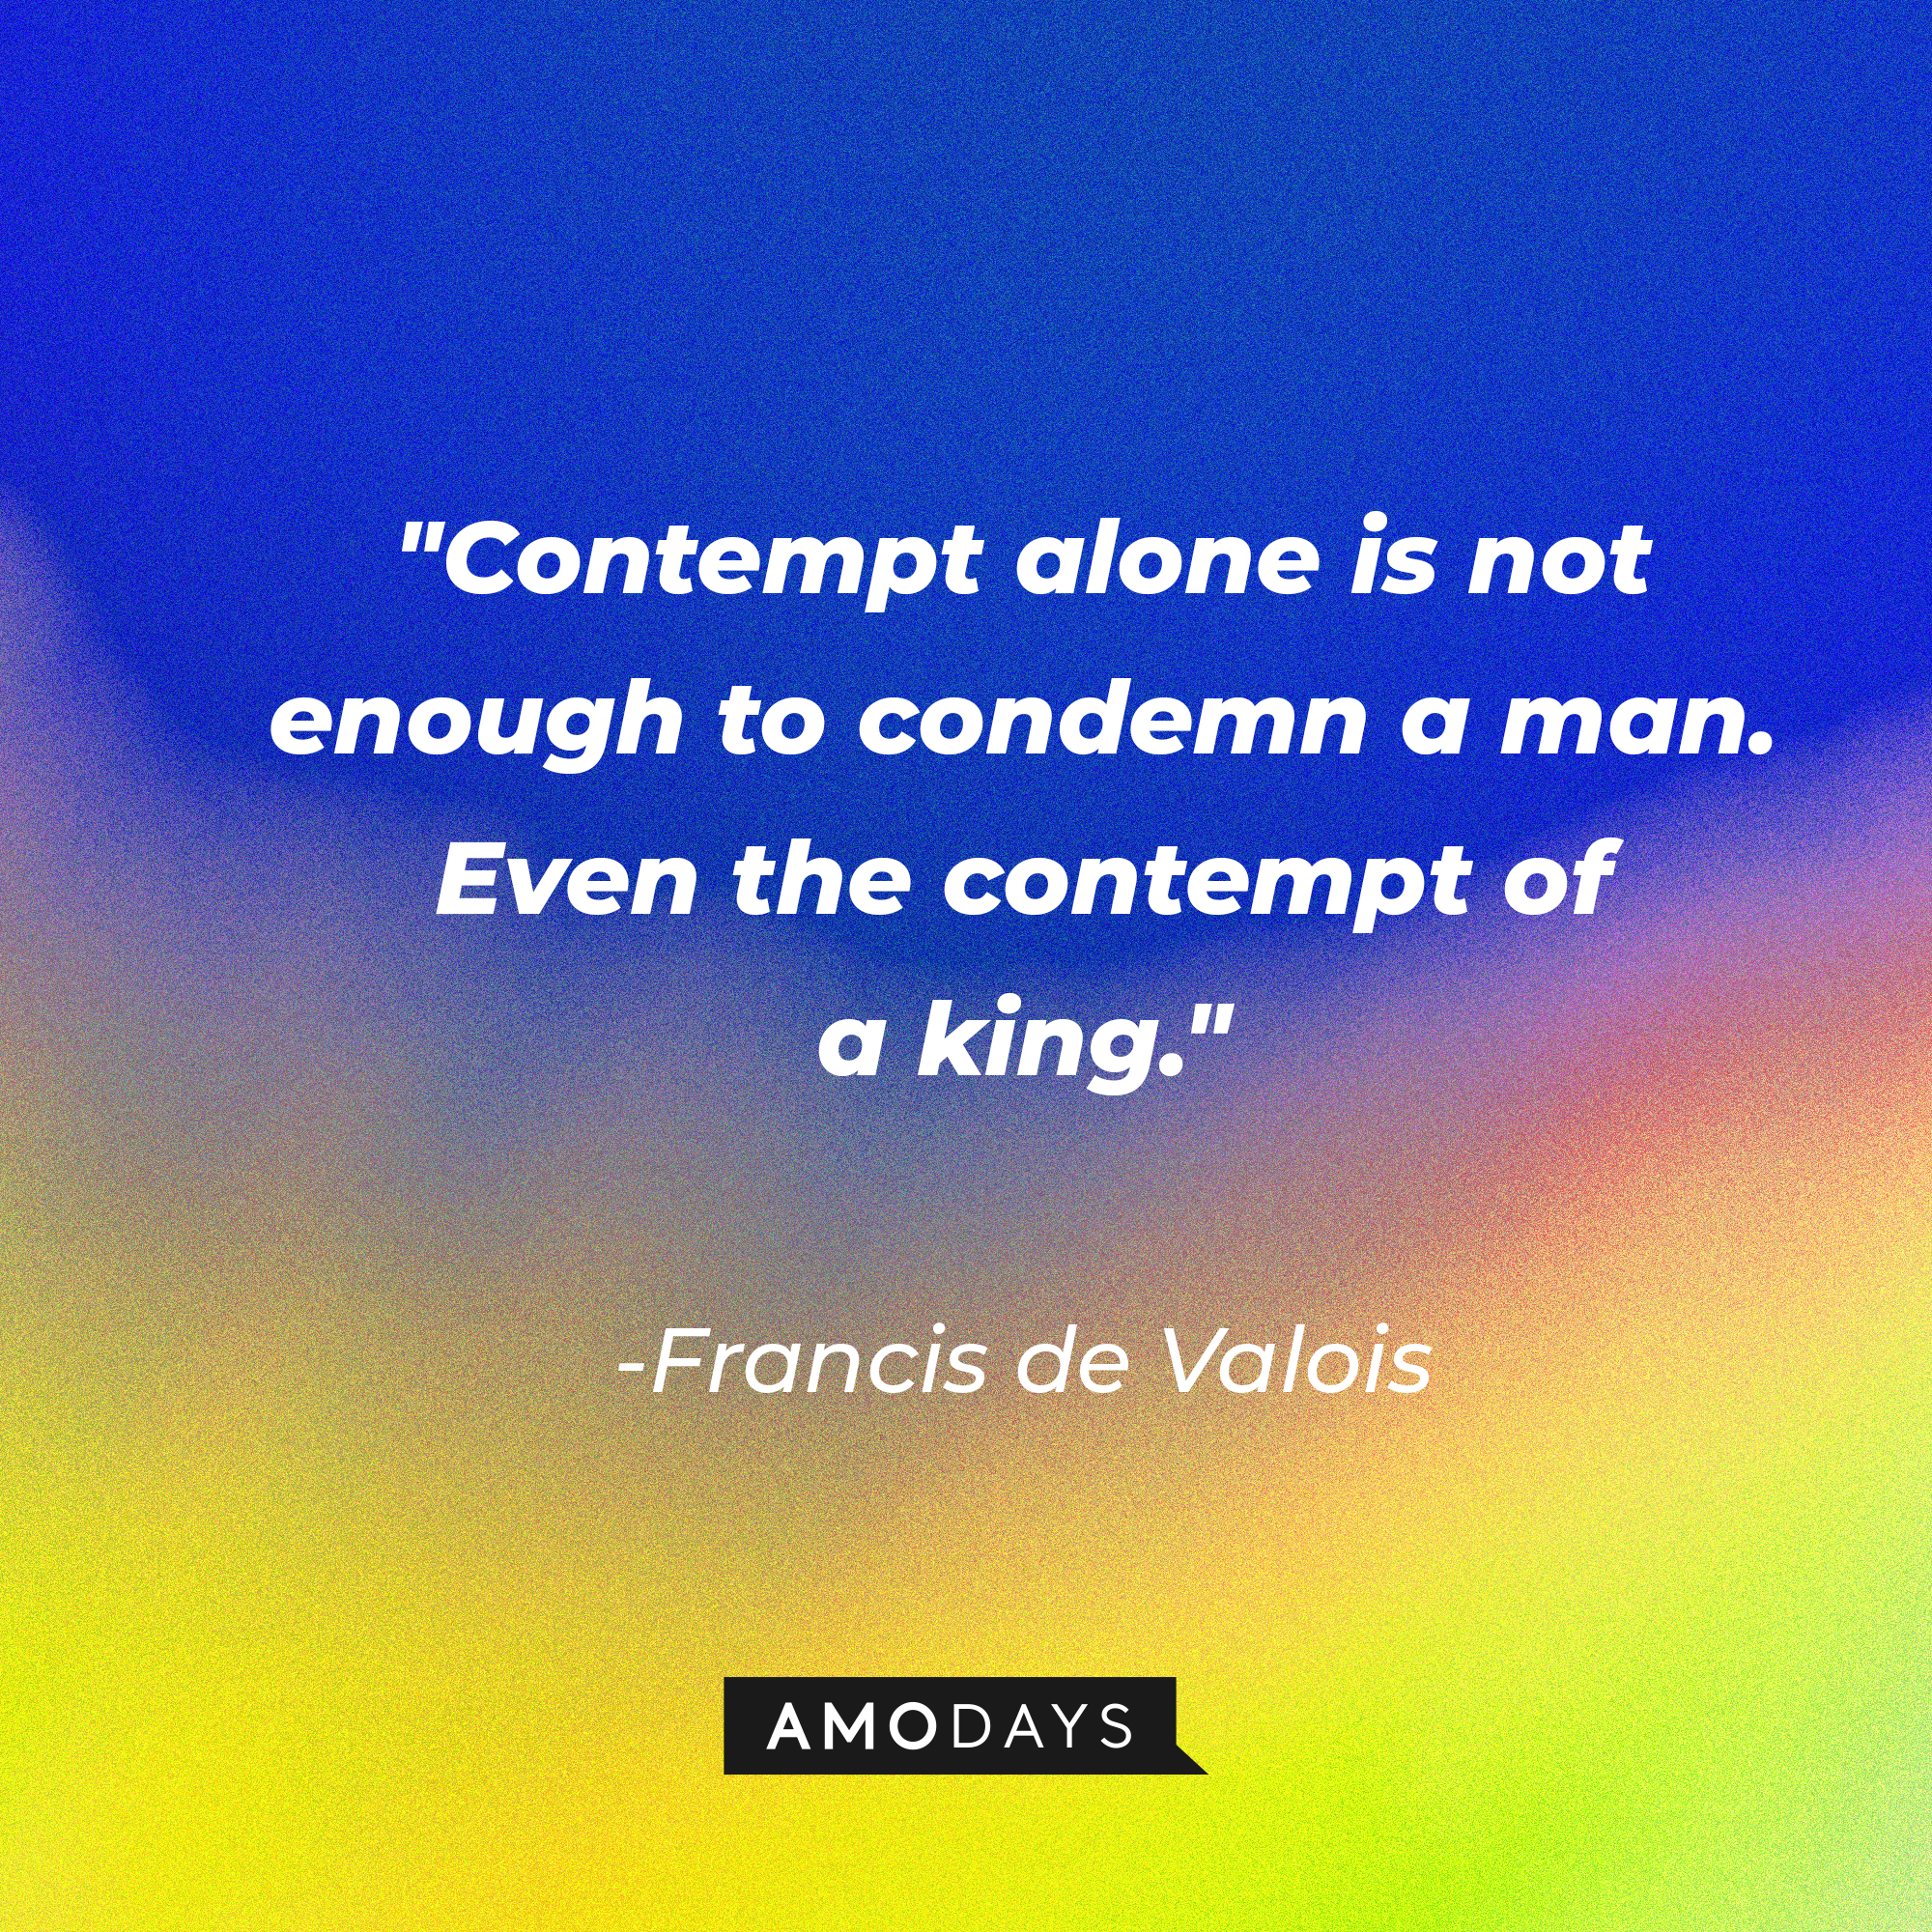 Francis de Valois' quote in "Reign:" "Contempt alone is not enough to condemn a man. Even the contempt of a king." | Source: Amodays